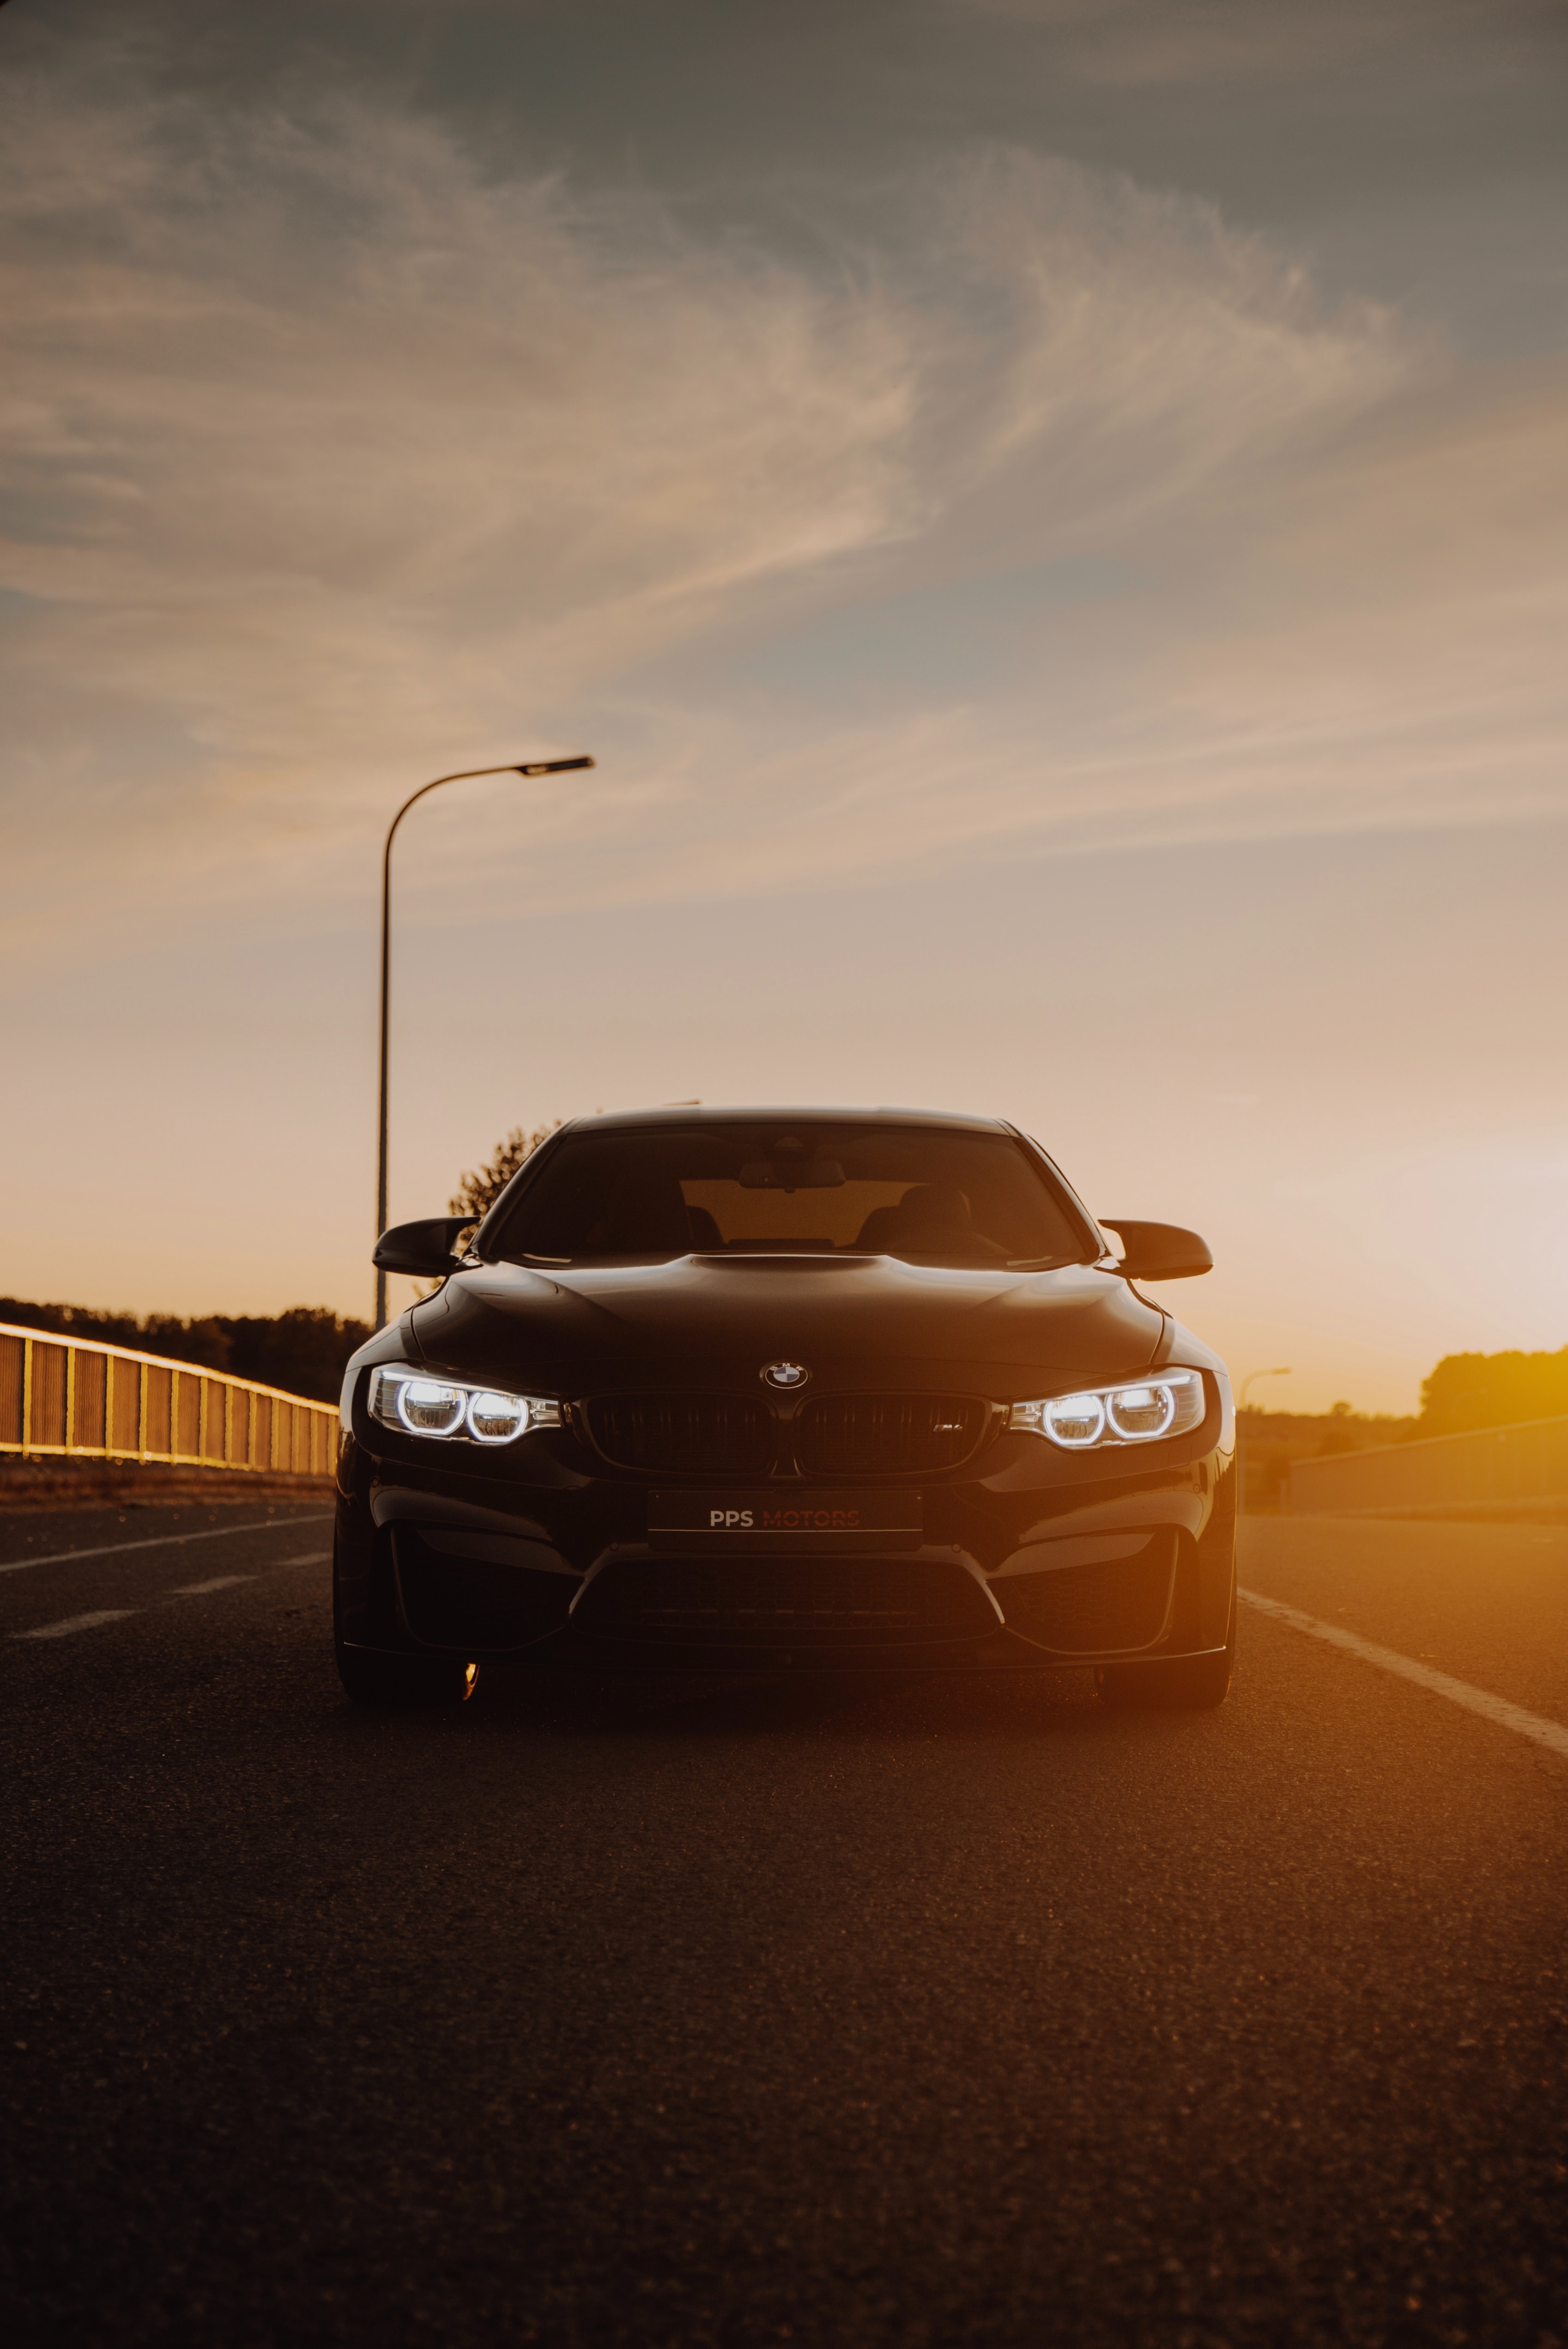 sports car, bmw, sports, cars, beams, rays, car, front view, bmw m4 phone background